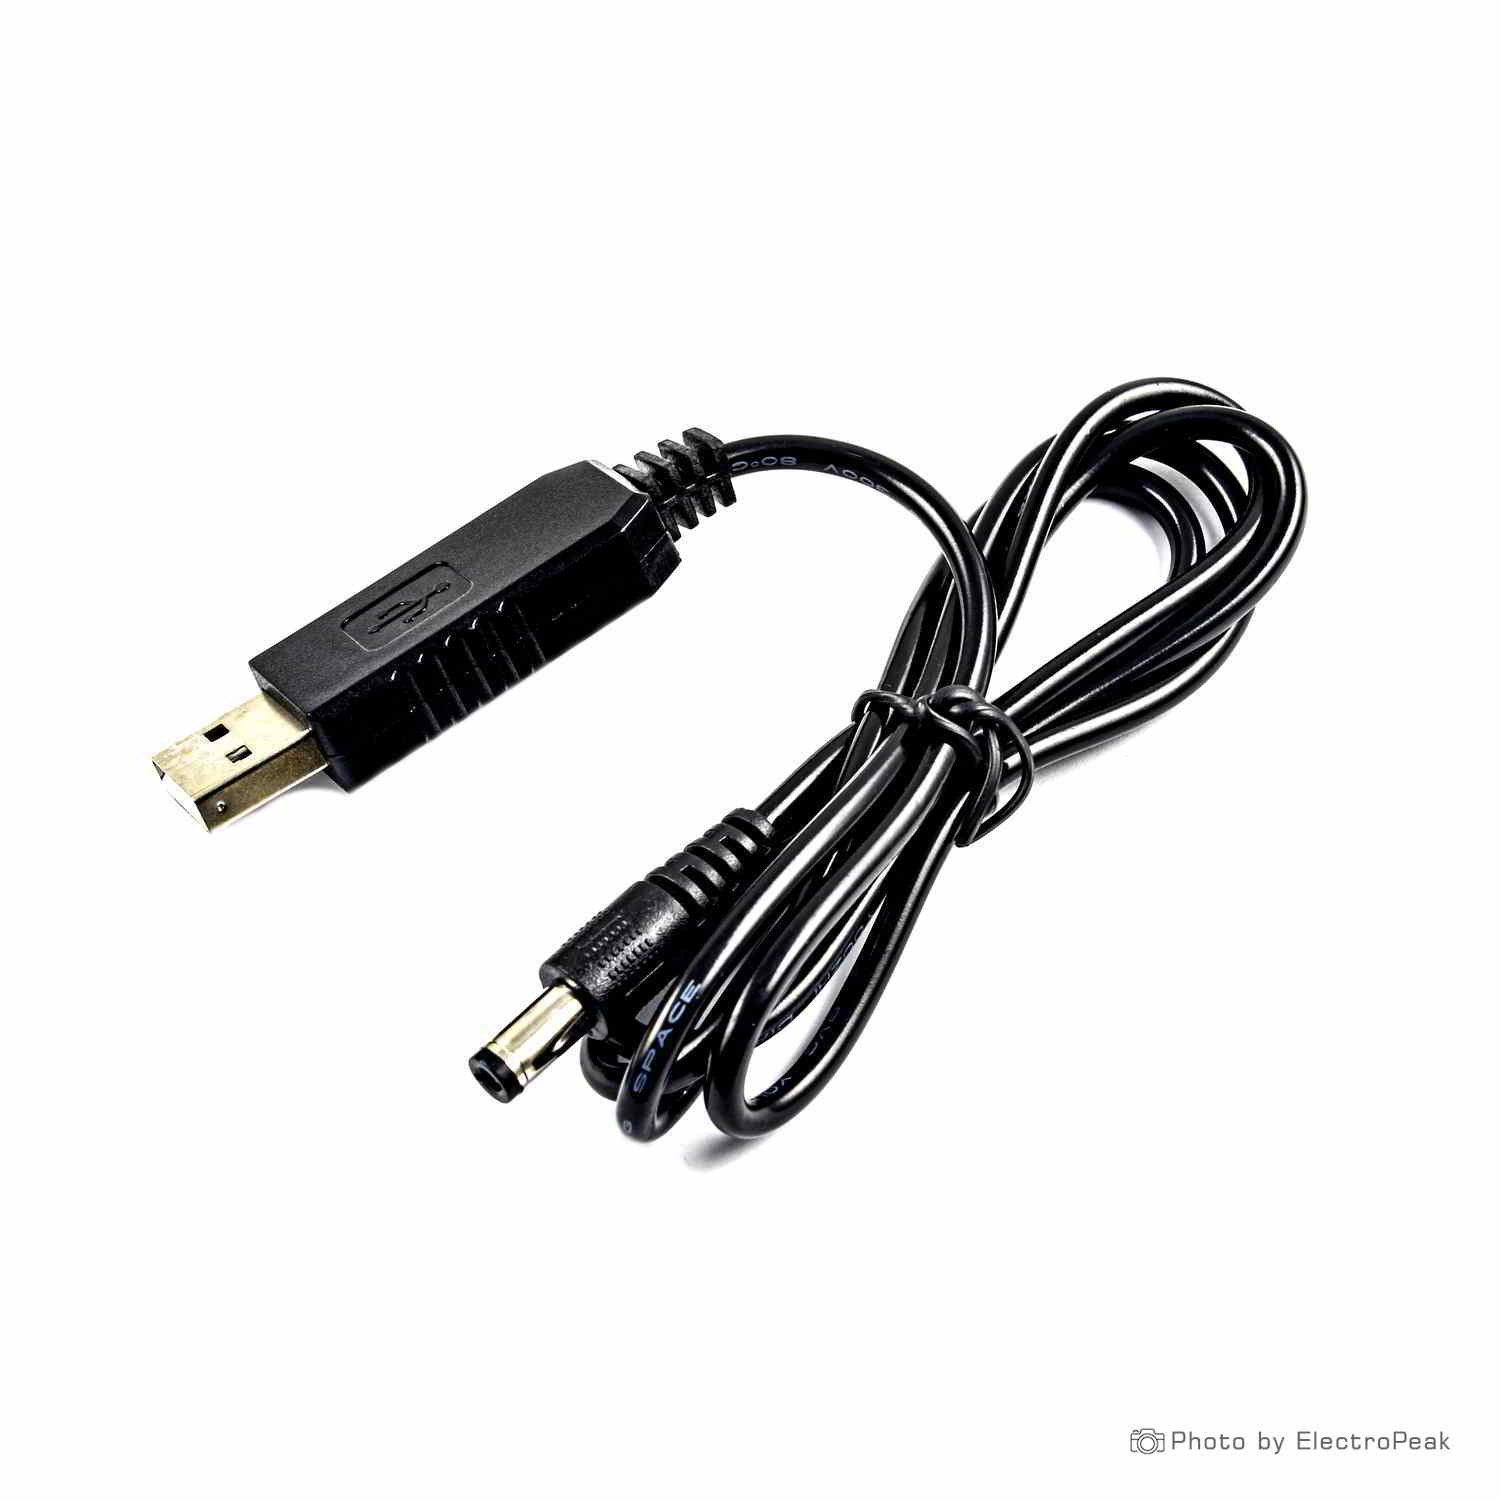 USB to 5.5mm / 2.1mm DC Booster Cable - 12V Output